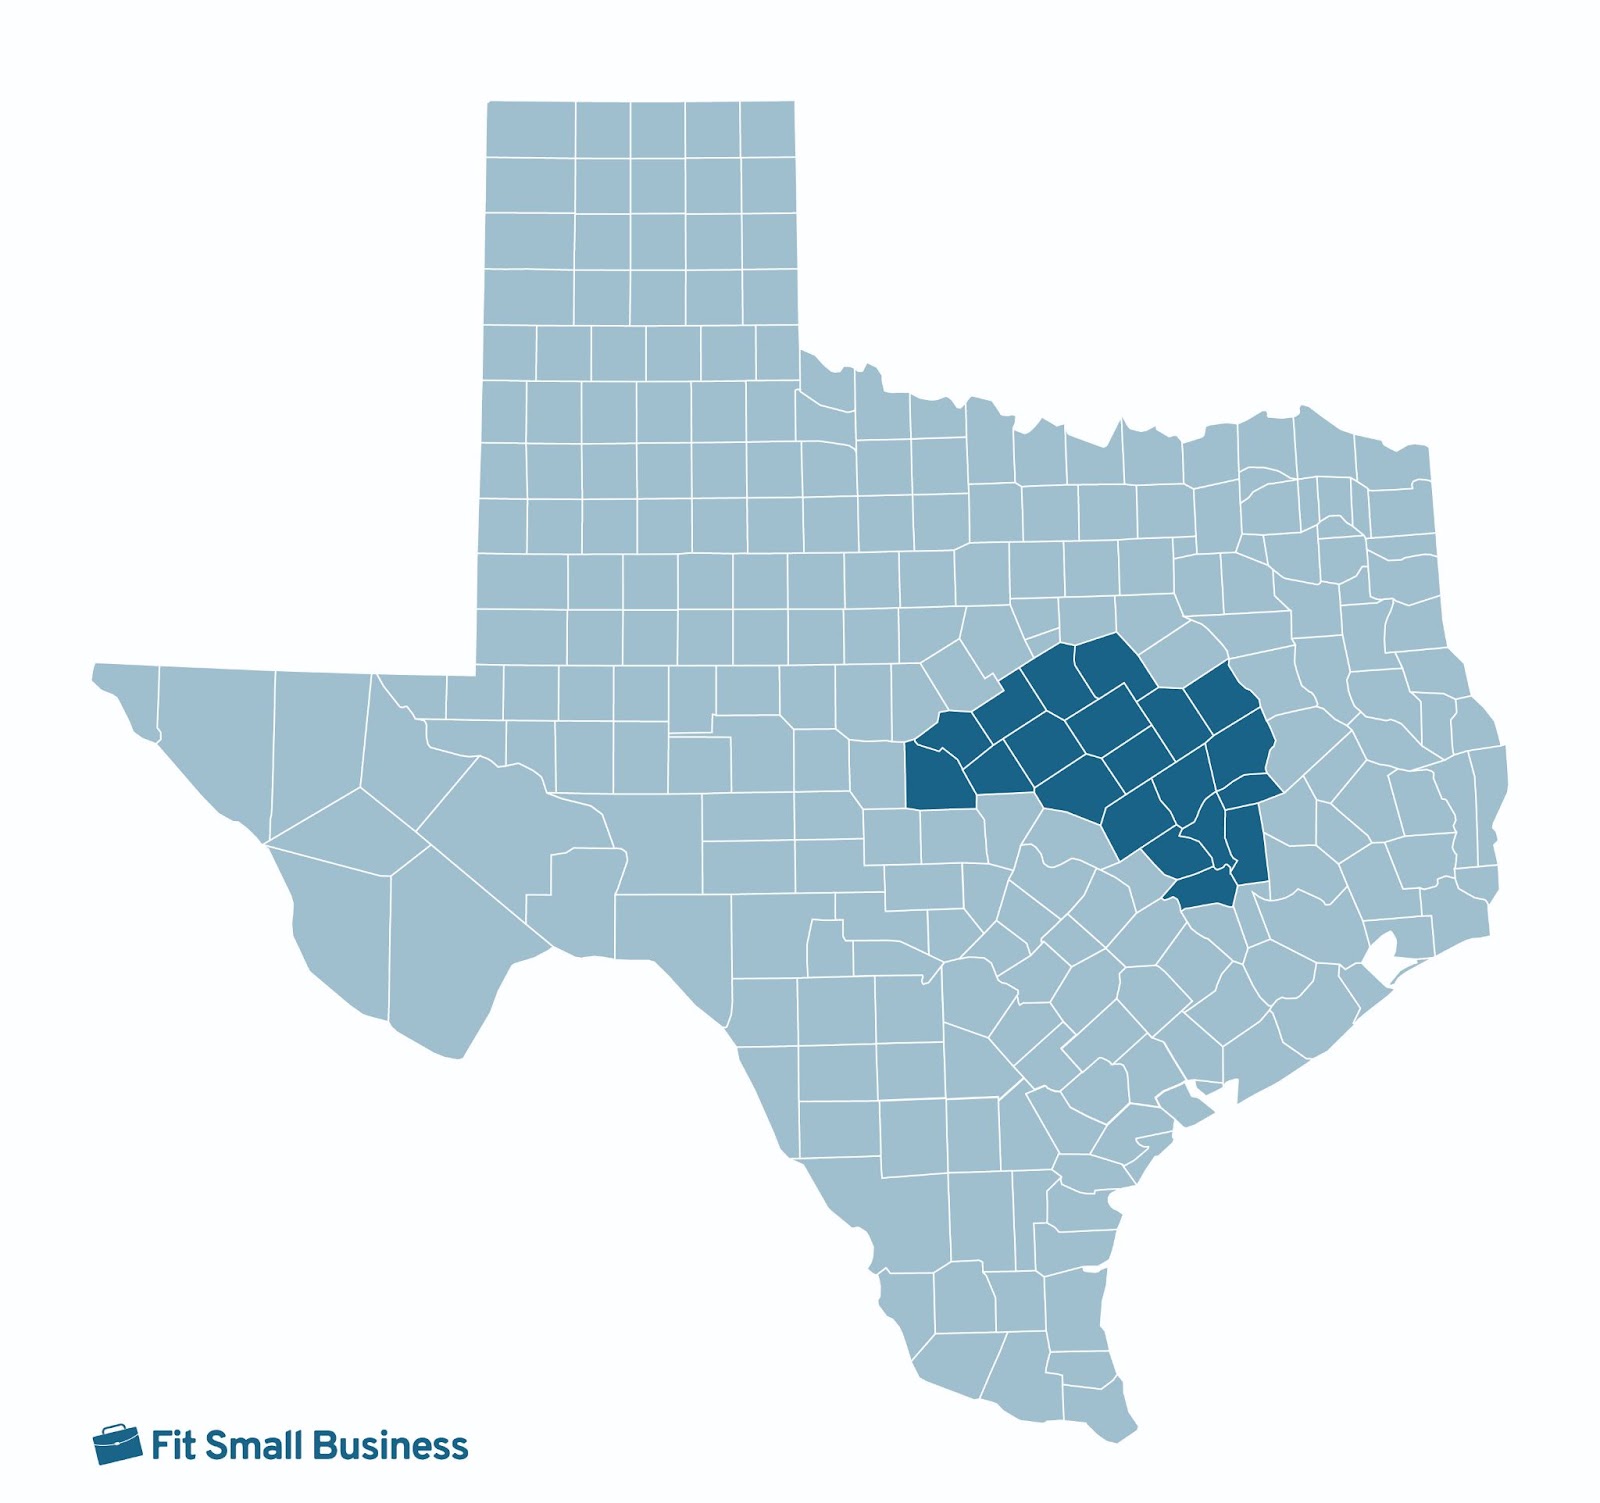 Other Business Banks in Central Texas.